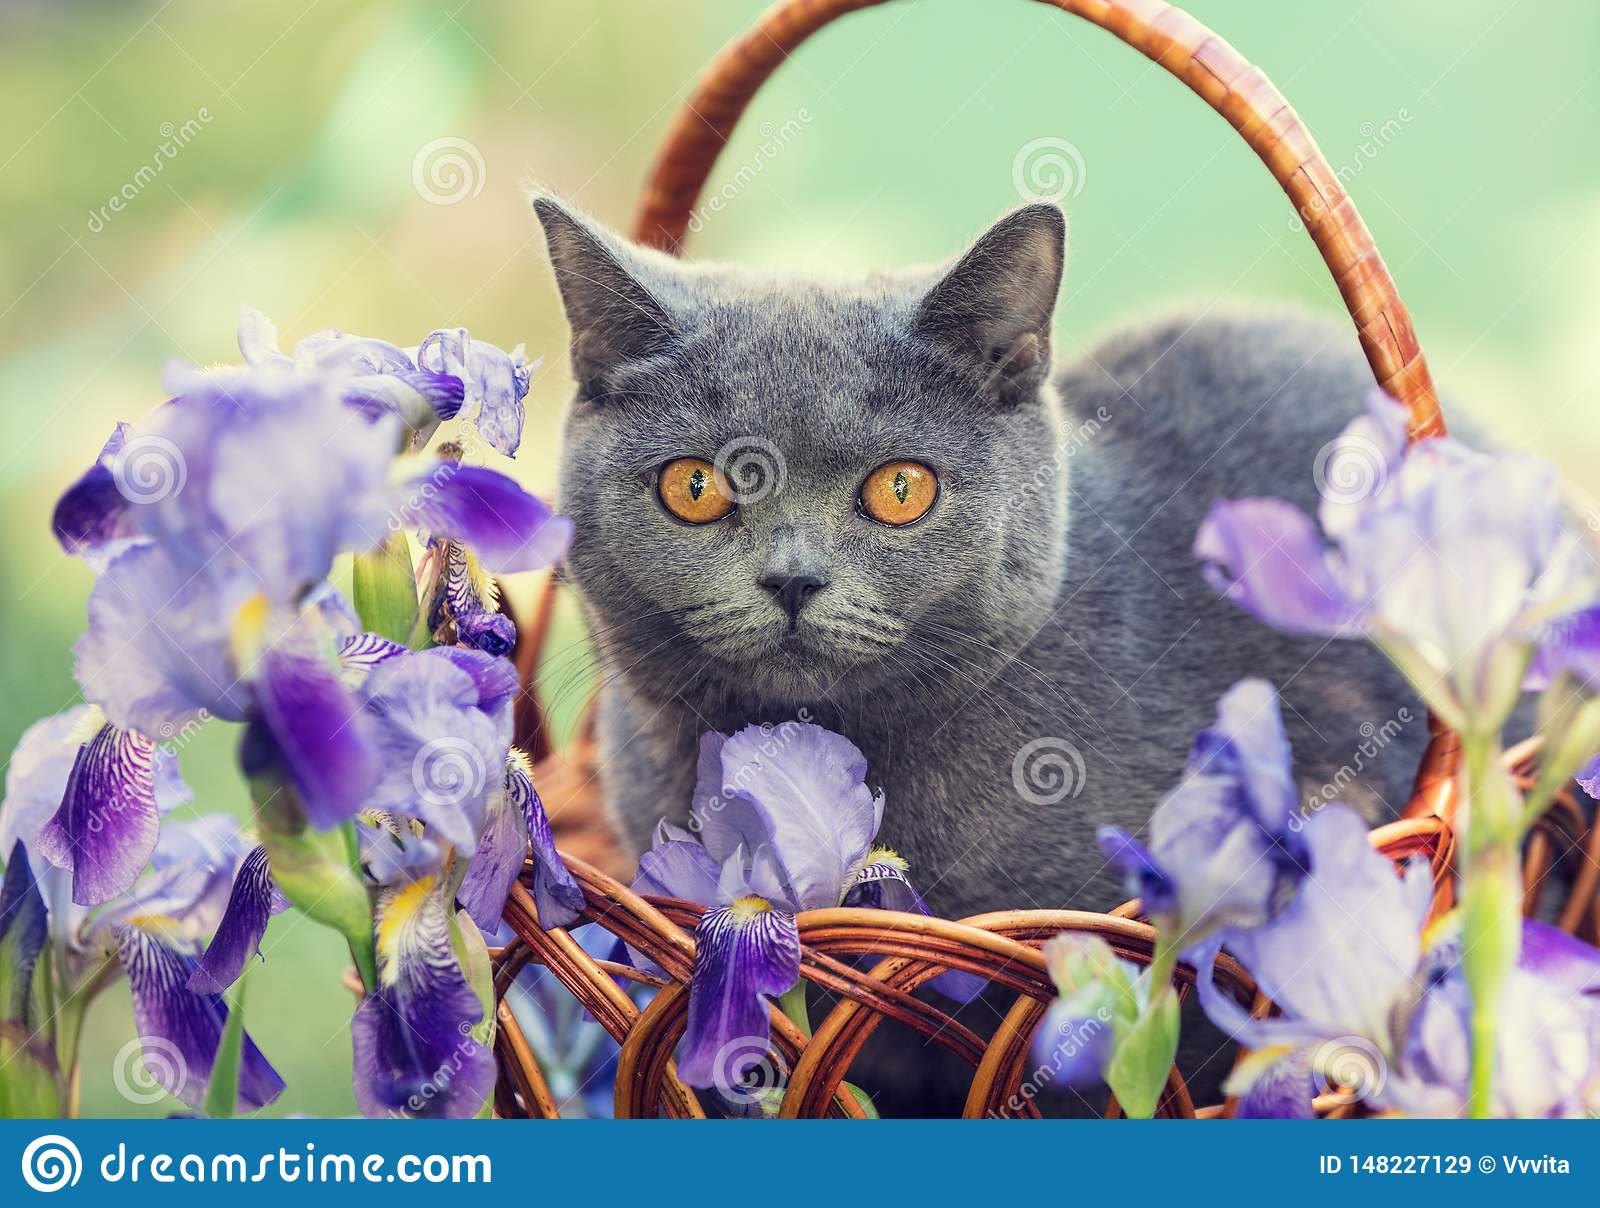 Cat Sitting In A Basket In Iris Flowers Stock Image ...